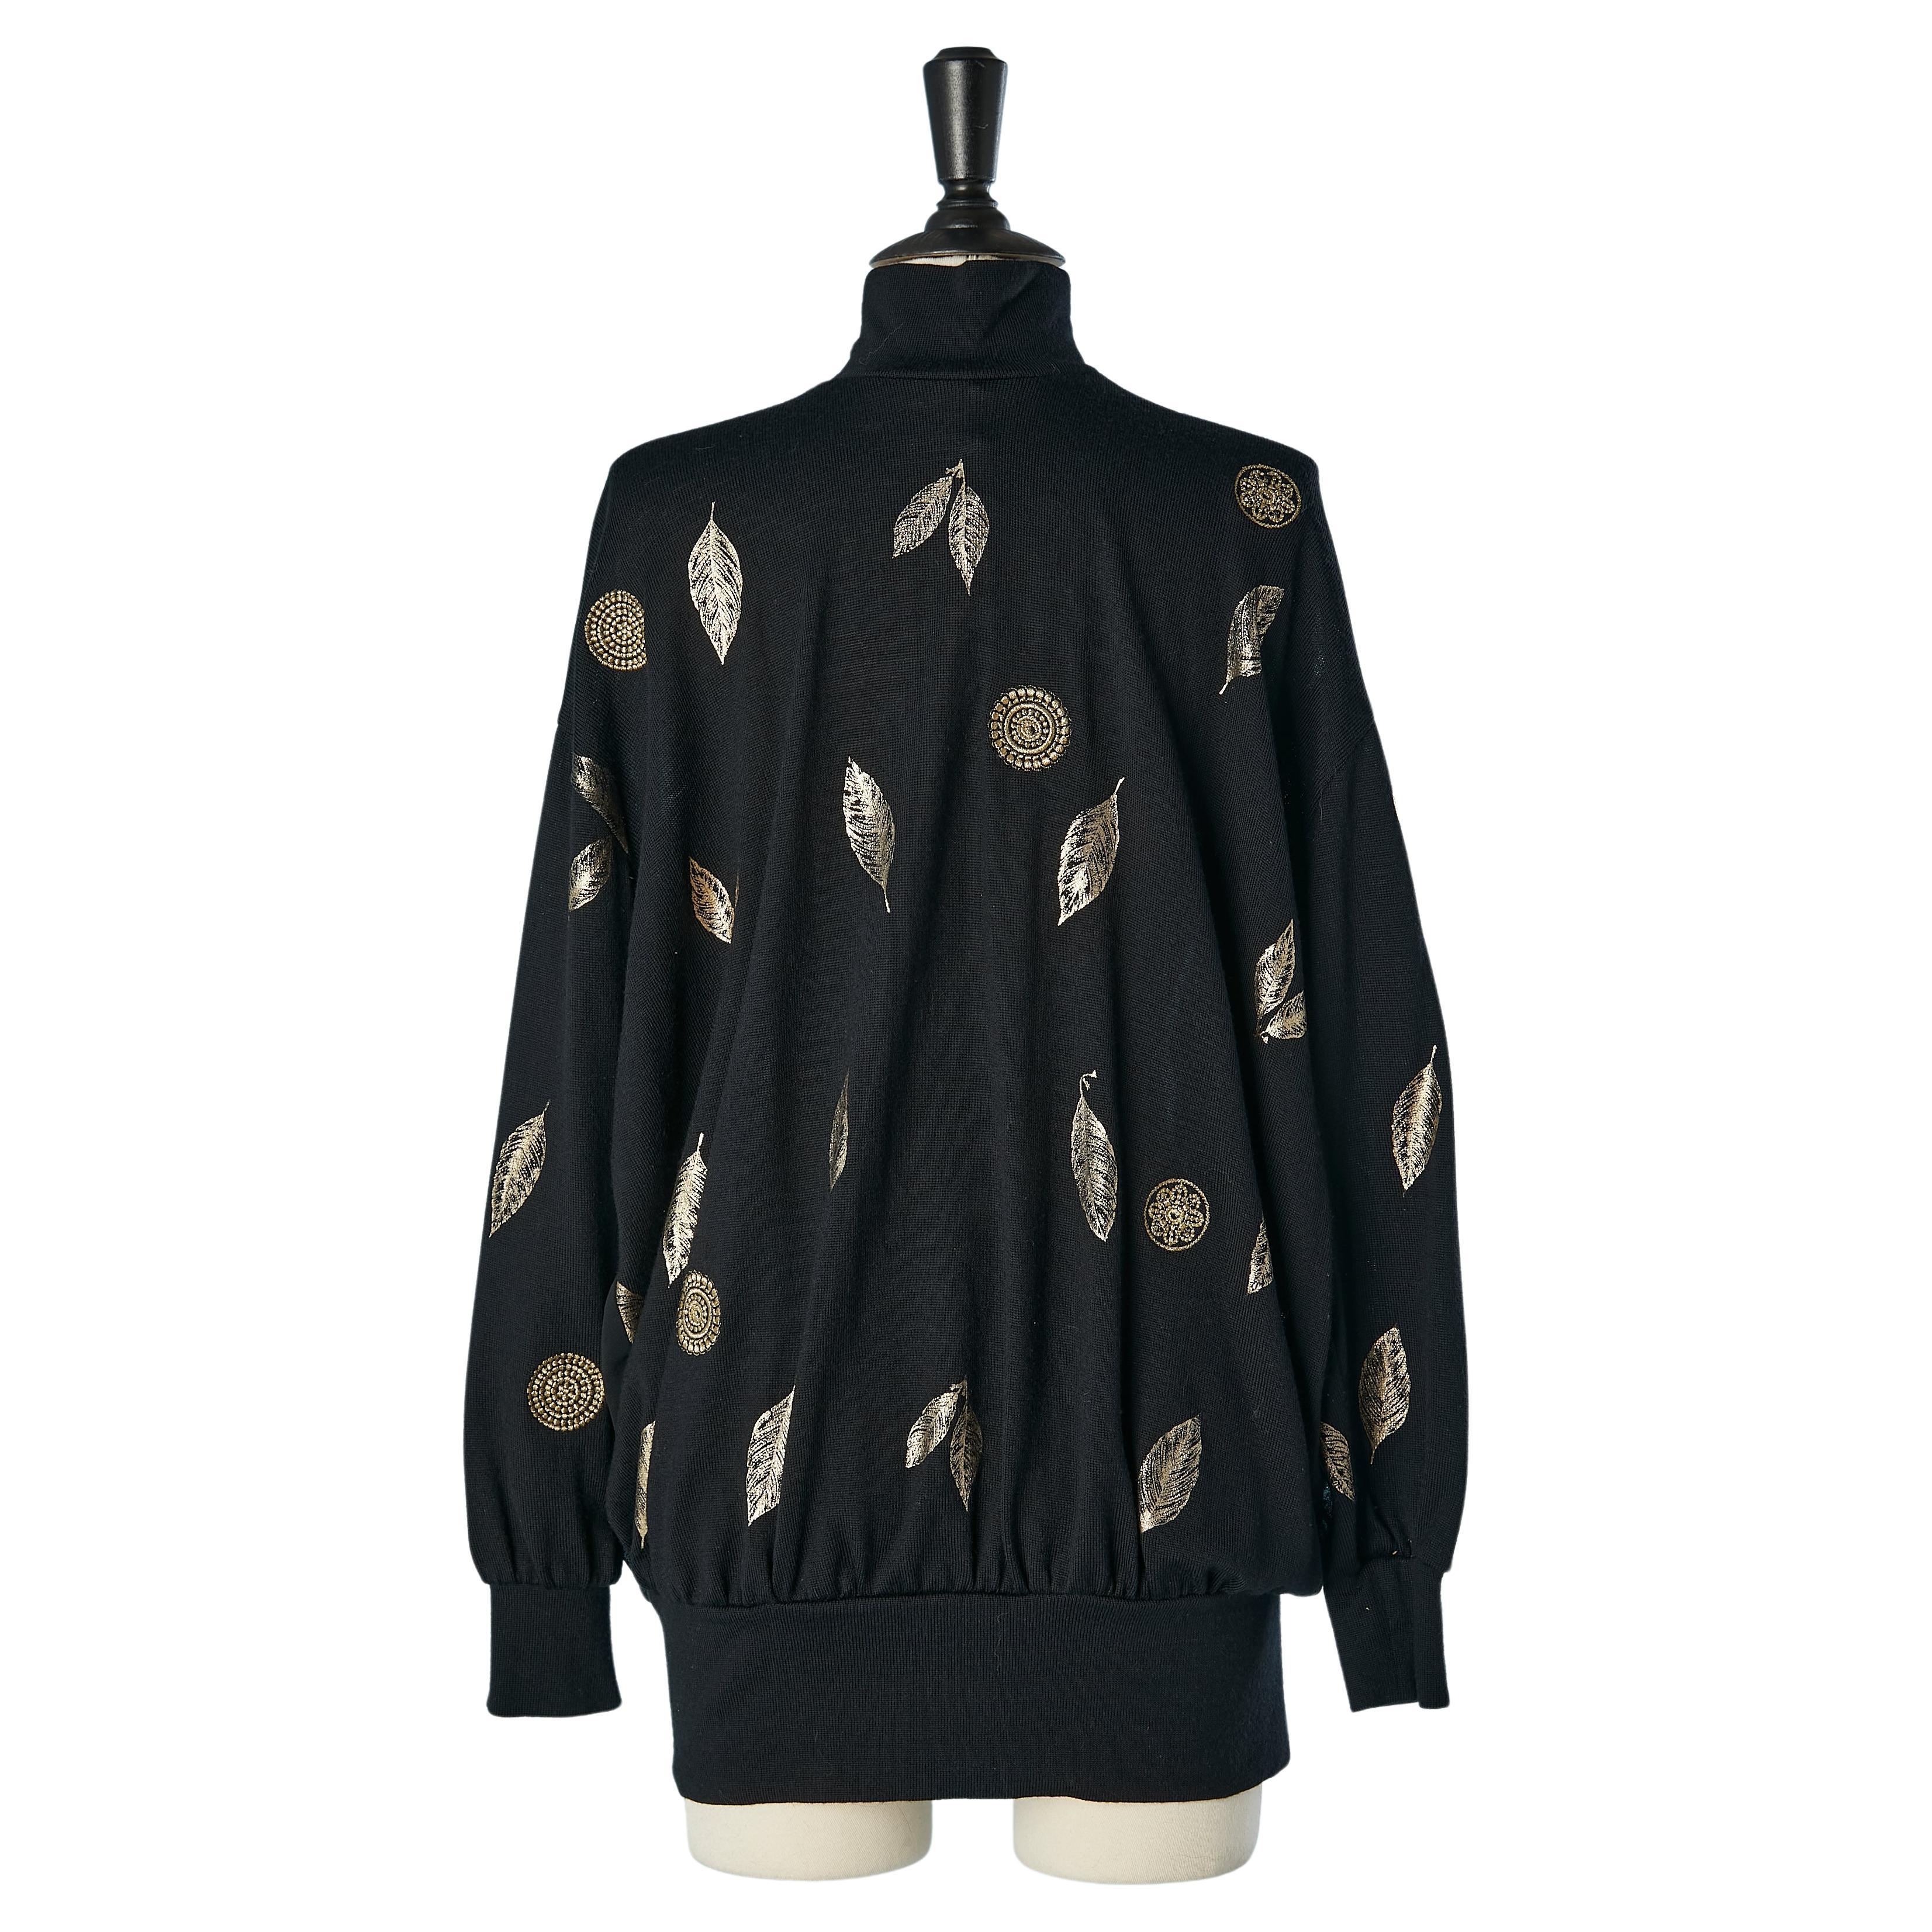 Black sweater with gold details embellishment and see-through back G. Ferré 